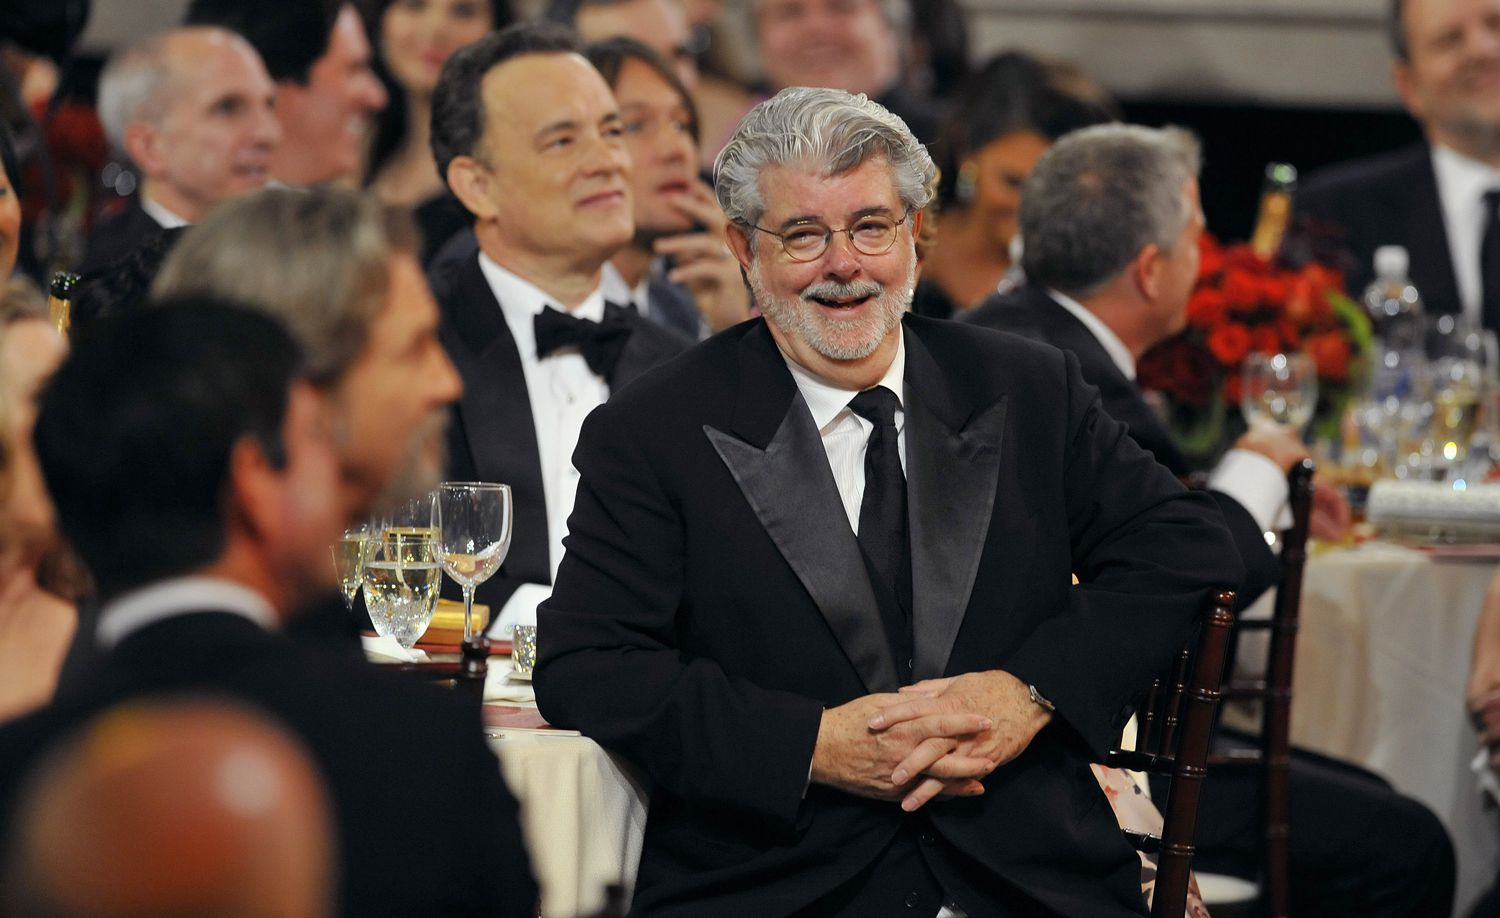 Tom Hanks and George Lucas during the 67th Annual Golden Globe Awards held at the Beverly Hilton Hotel on January 17, 2010